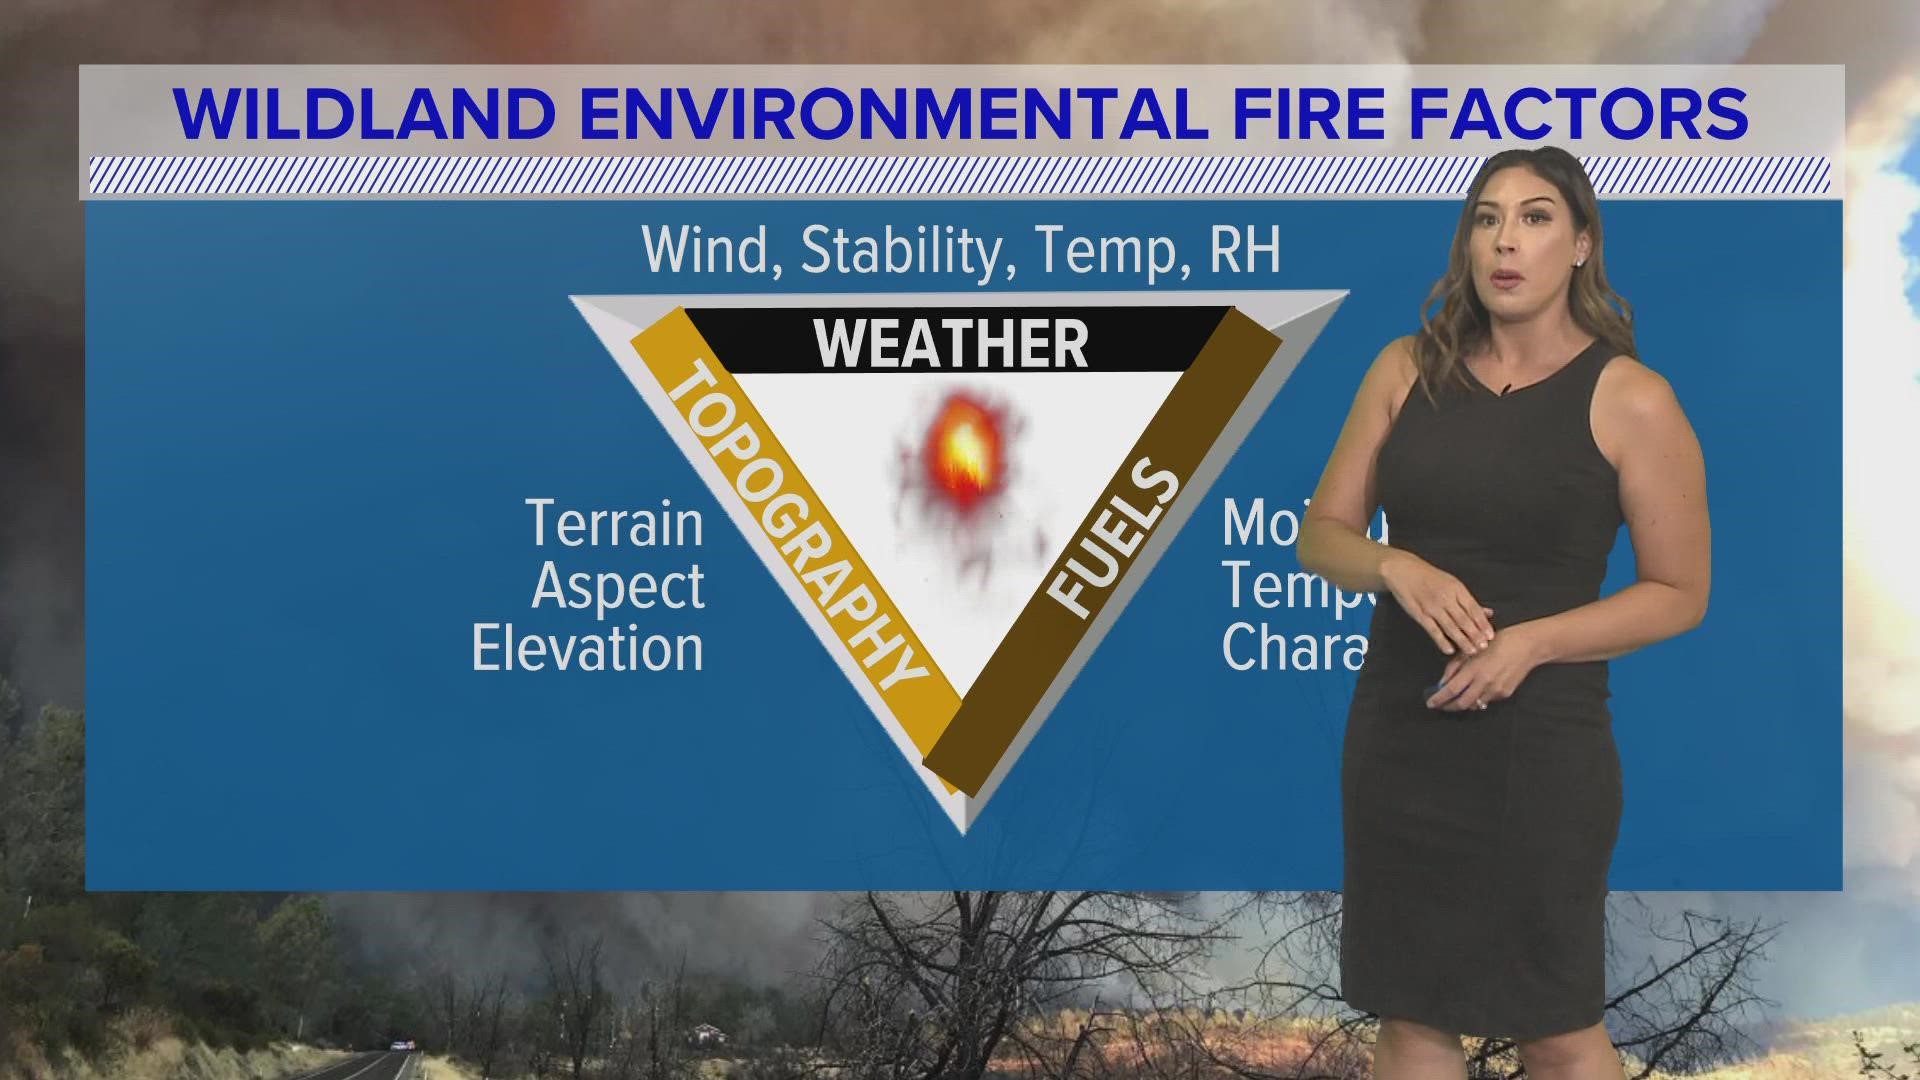 Our Carley Gomez shows us the wildland environmental fire factors in terms of weather, fuels and topography.